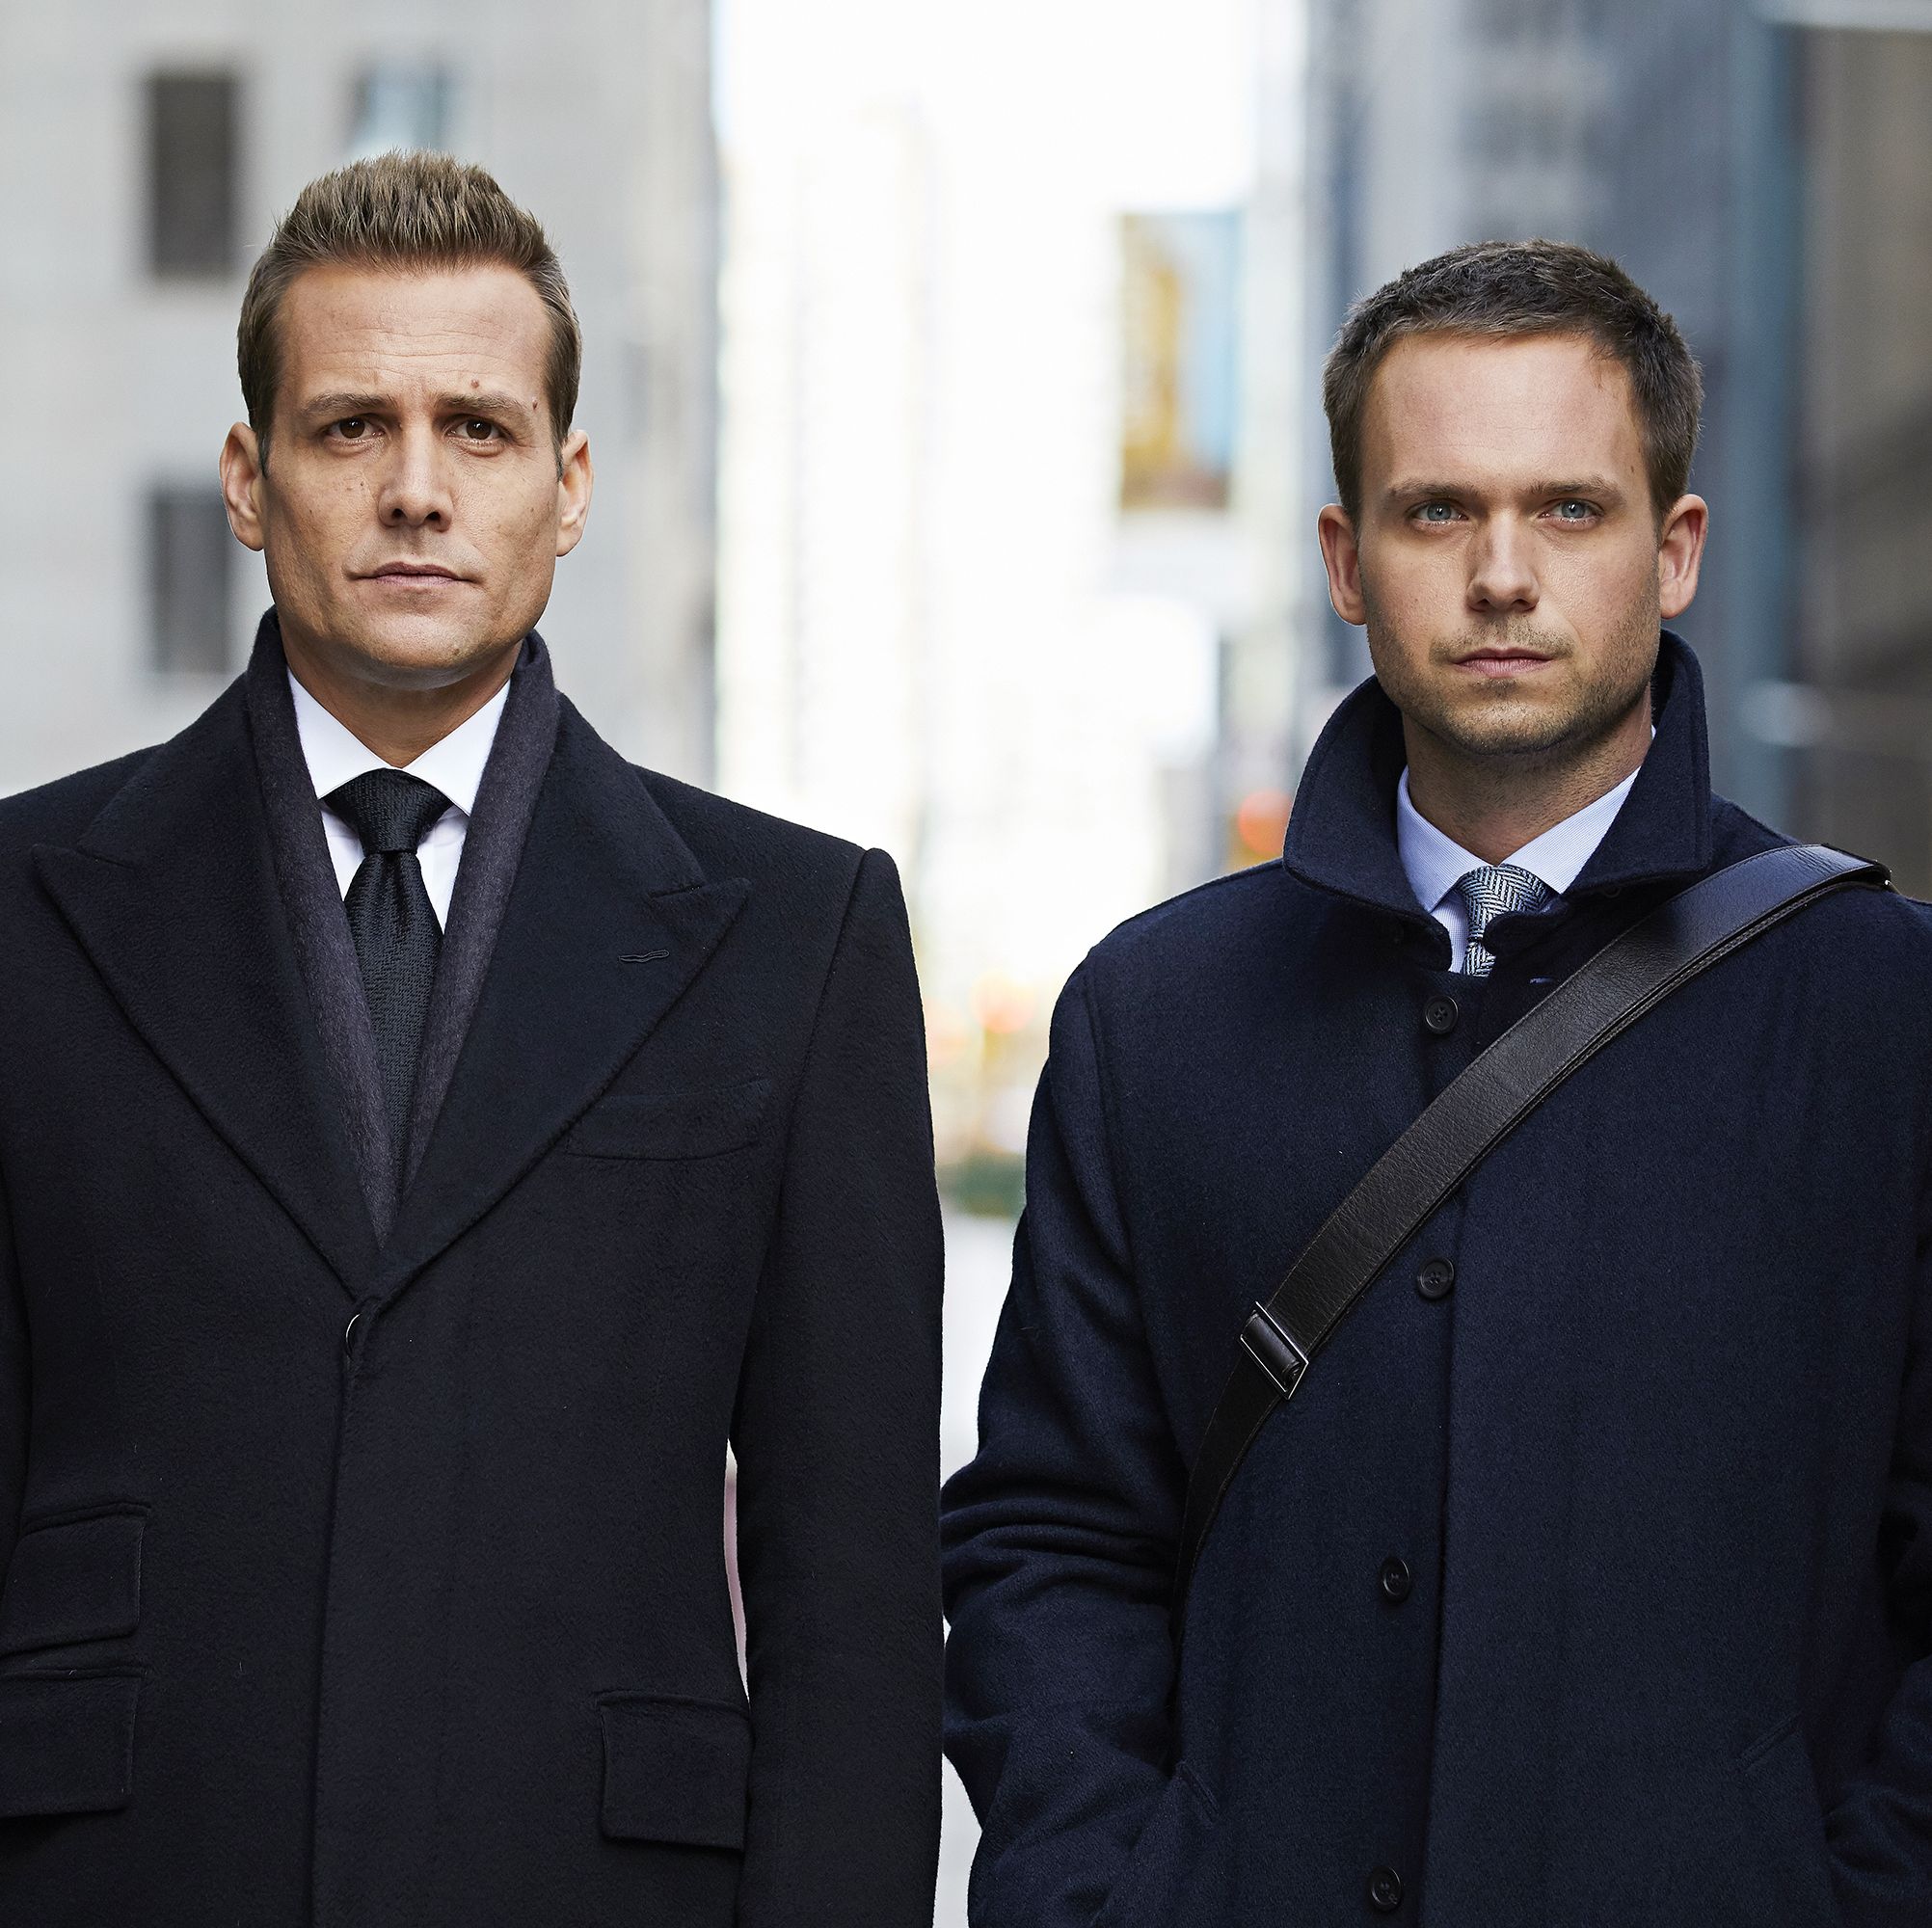 Will 'Suits' Actually Come Back for Season 10? Here's What We Know